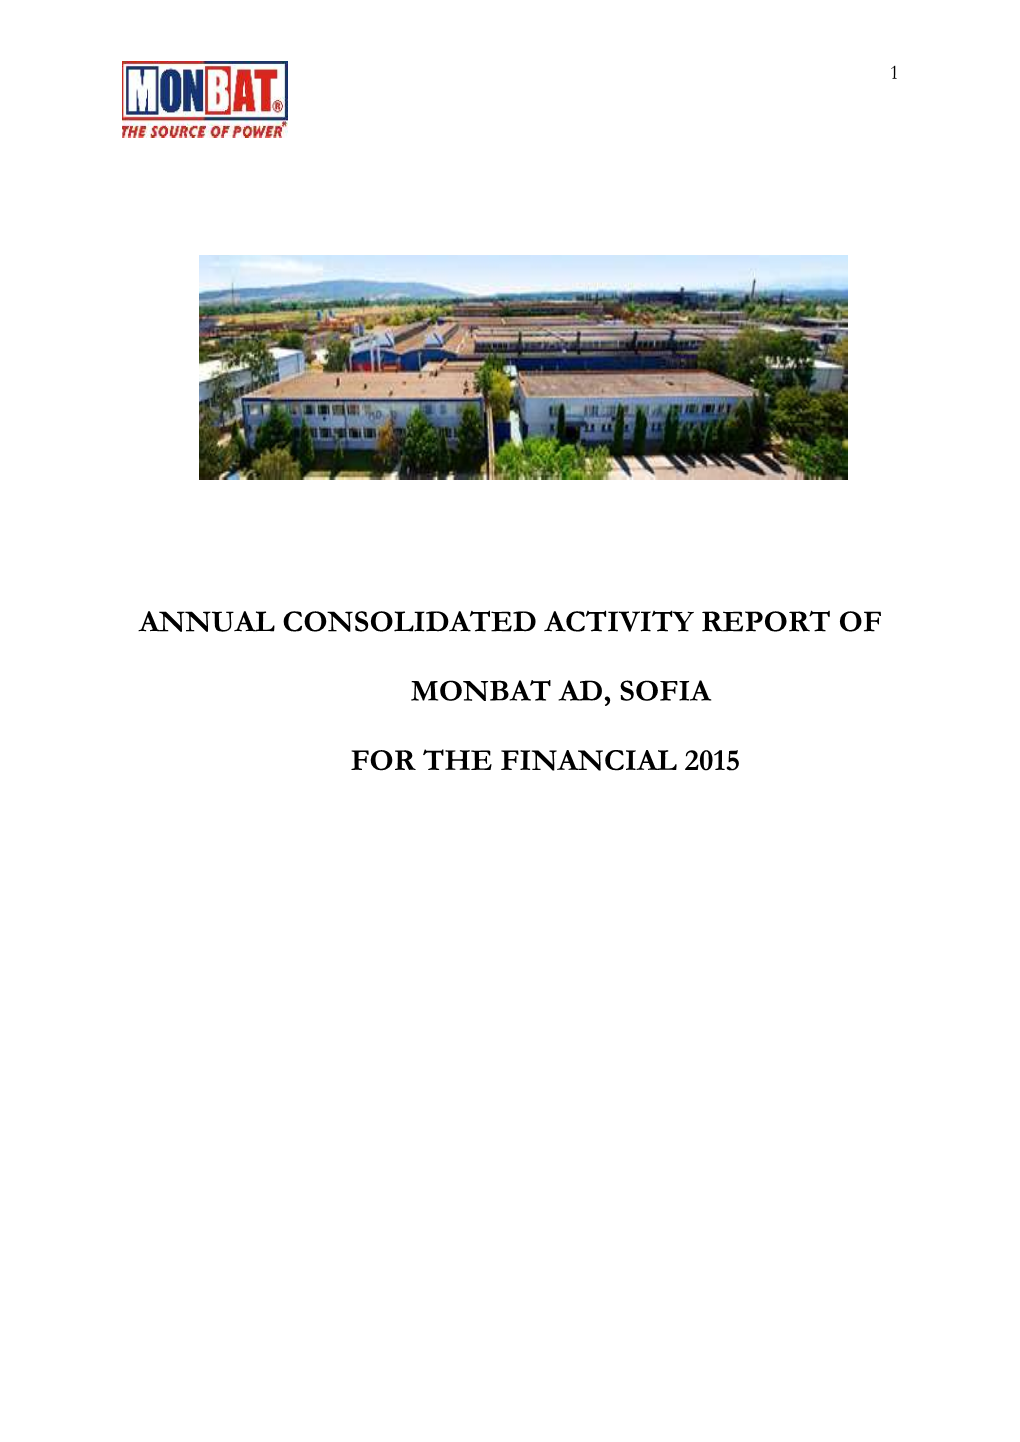 Annual Consolidated Activity Report of Monbat Ad, Sofia for the Financial 2015